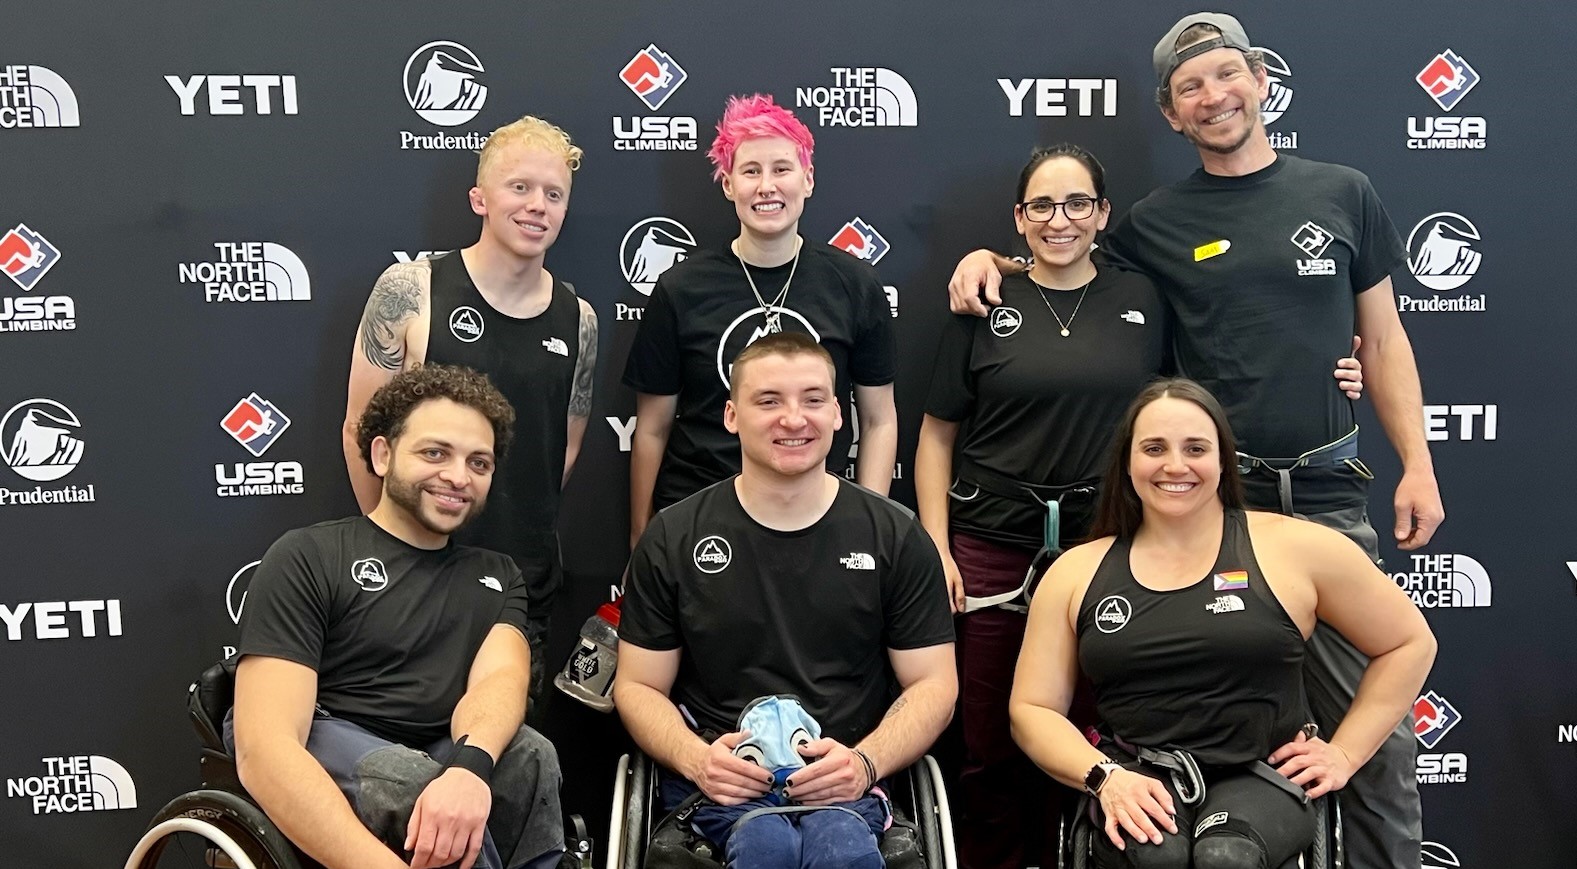 The Paradox Sports Competitive Climbing Team poses for a group shot. Everyone is wearing black The North Face tank tops and t-shirts with a Paradox Sports logo on the front.